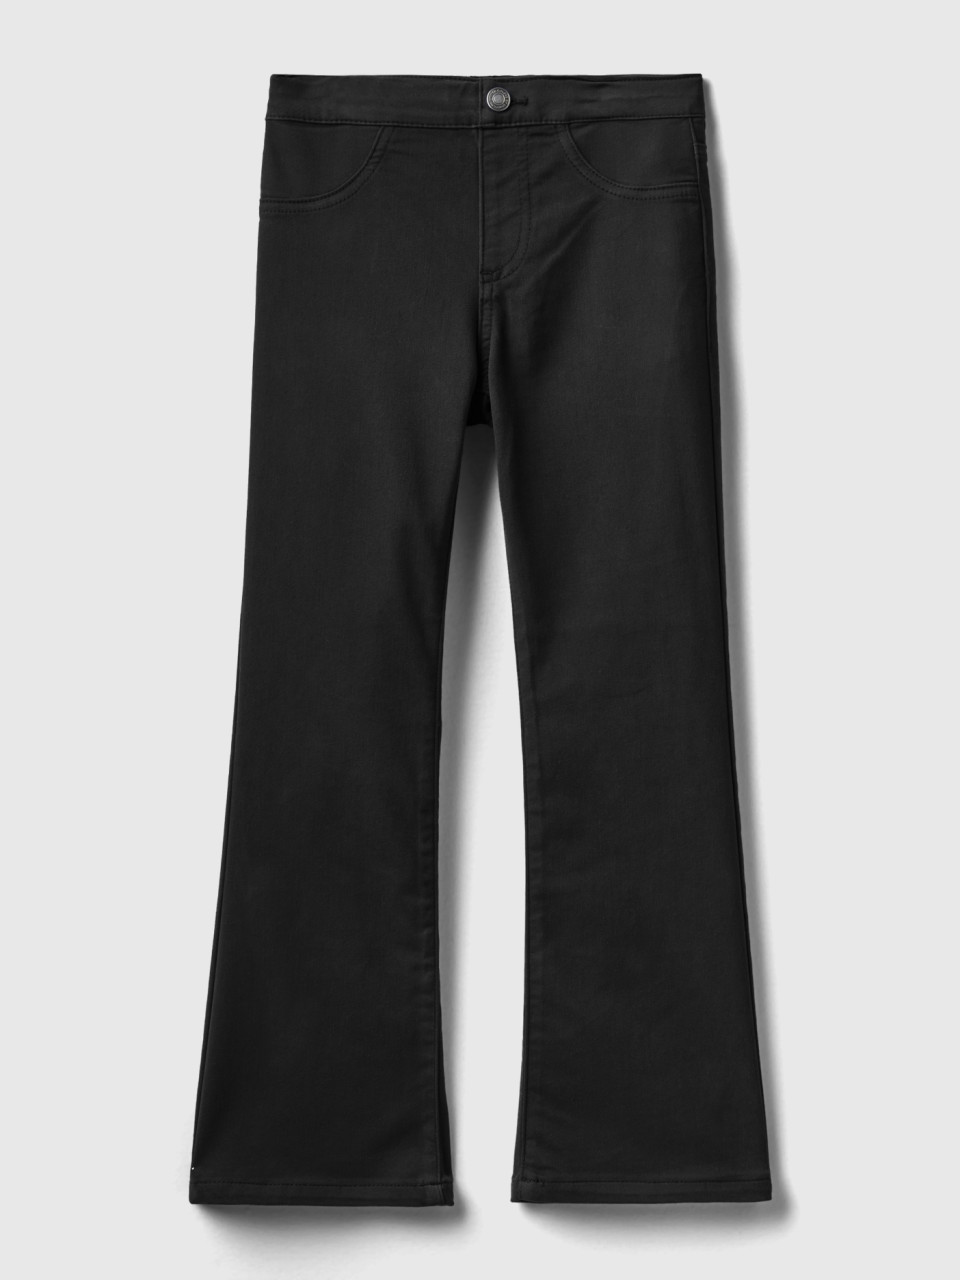 Benetton, Flared Stretch Trousers, Black, Kids